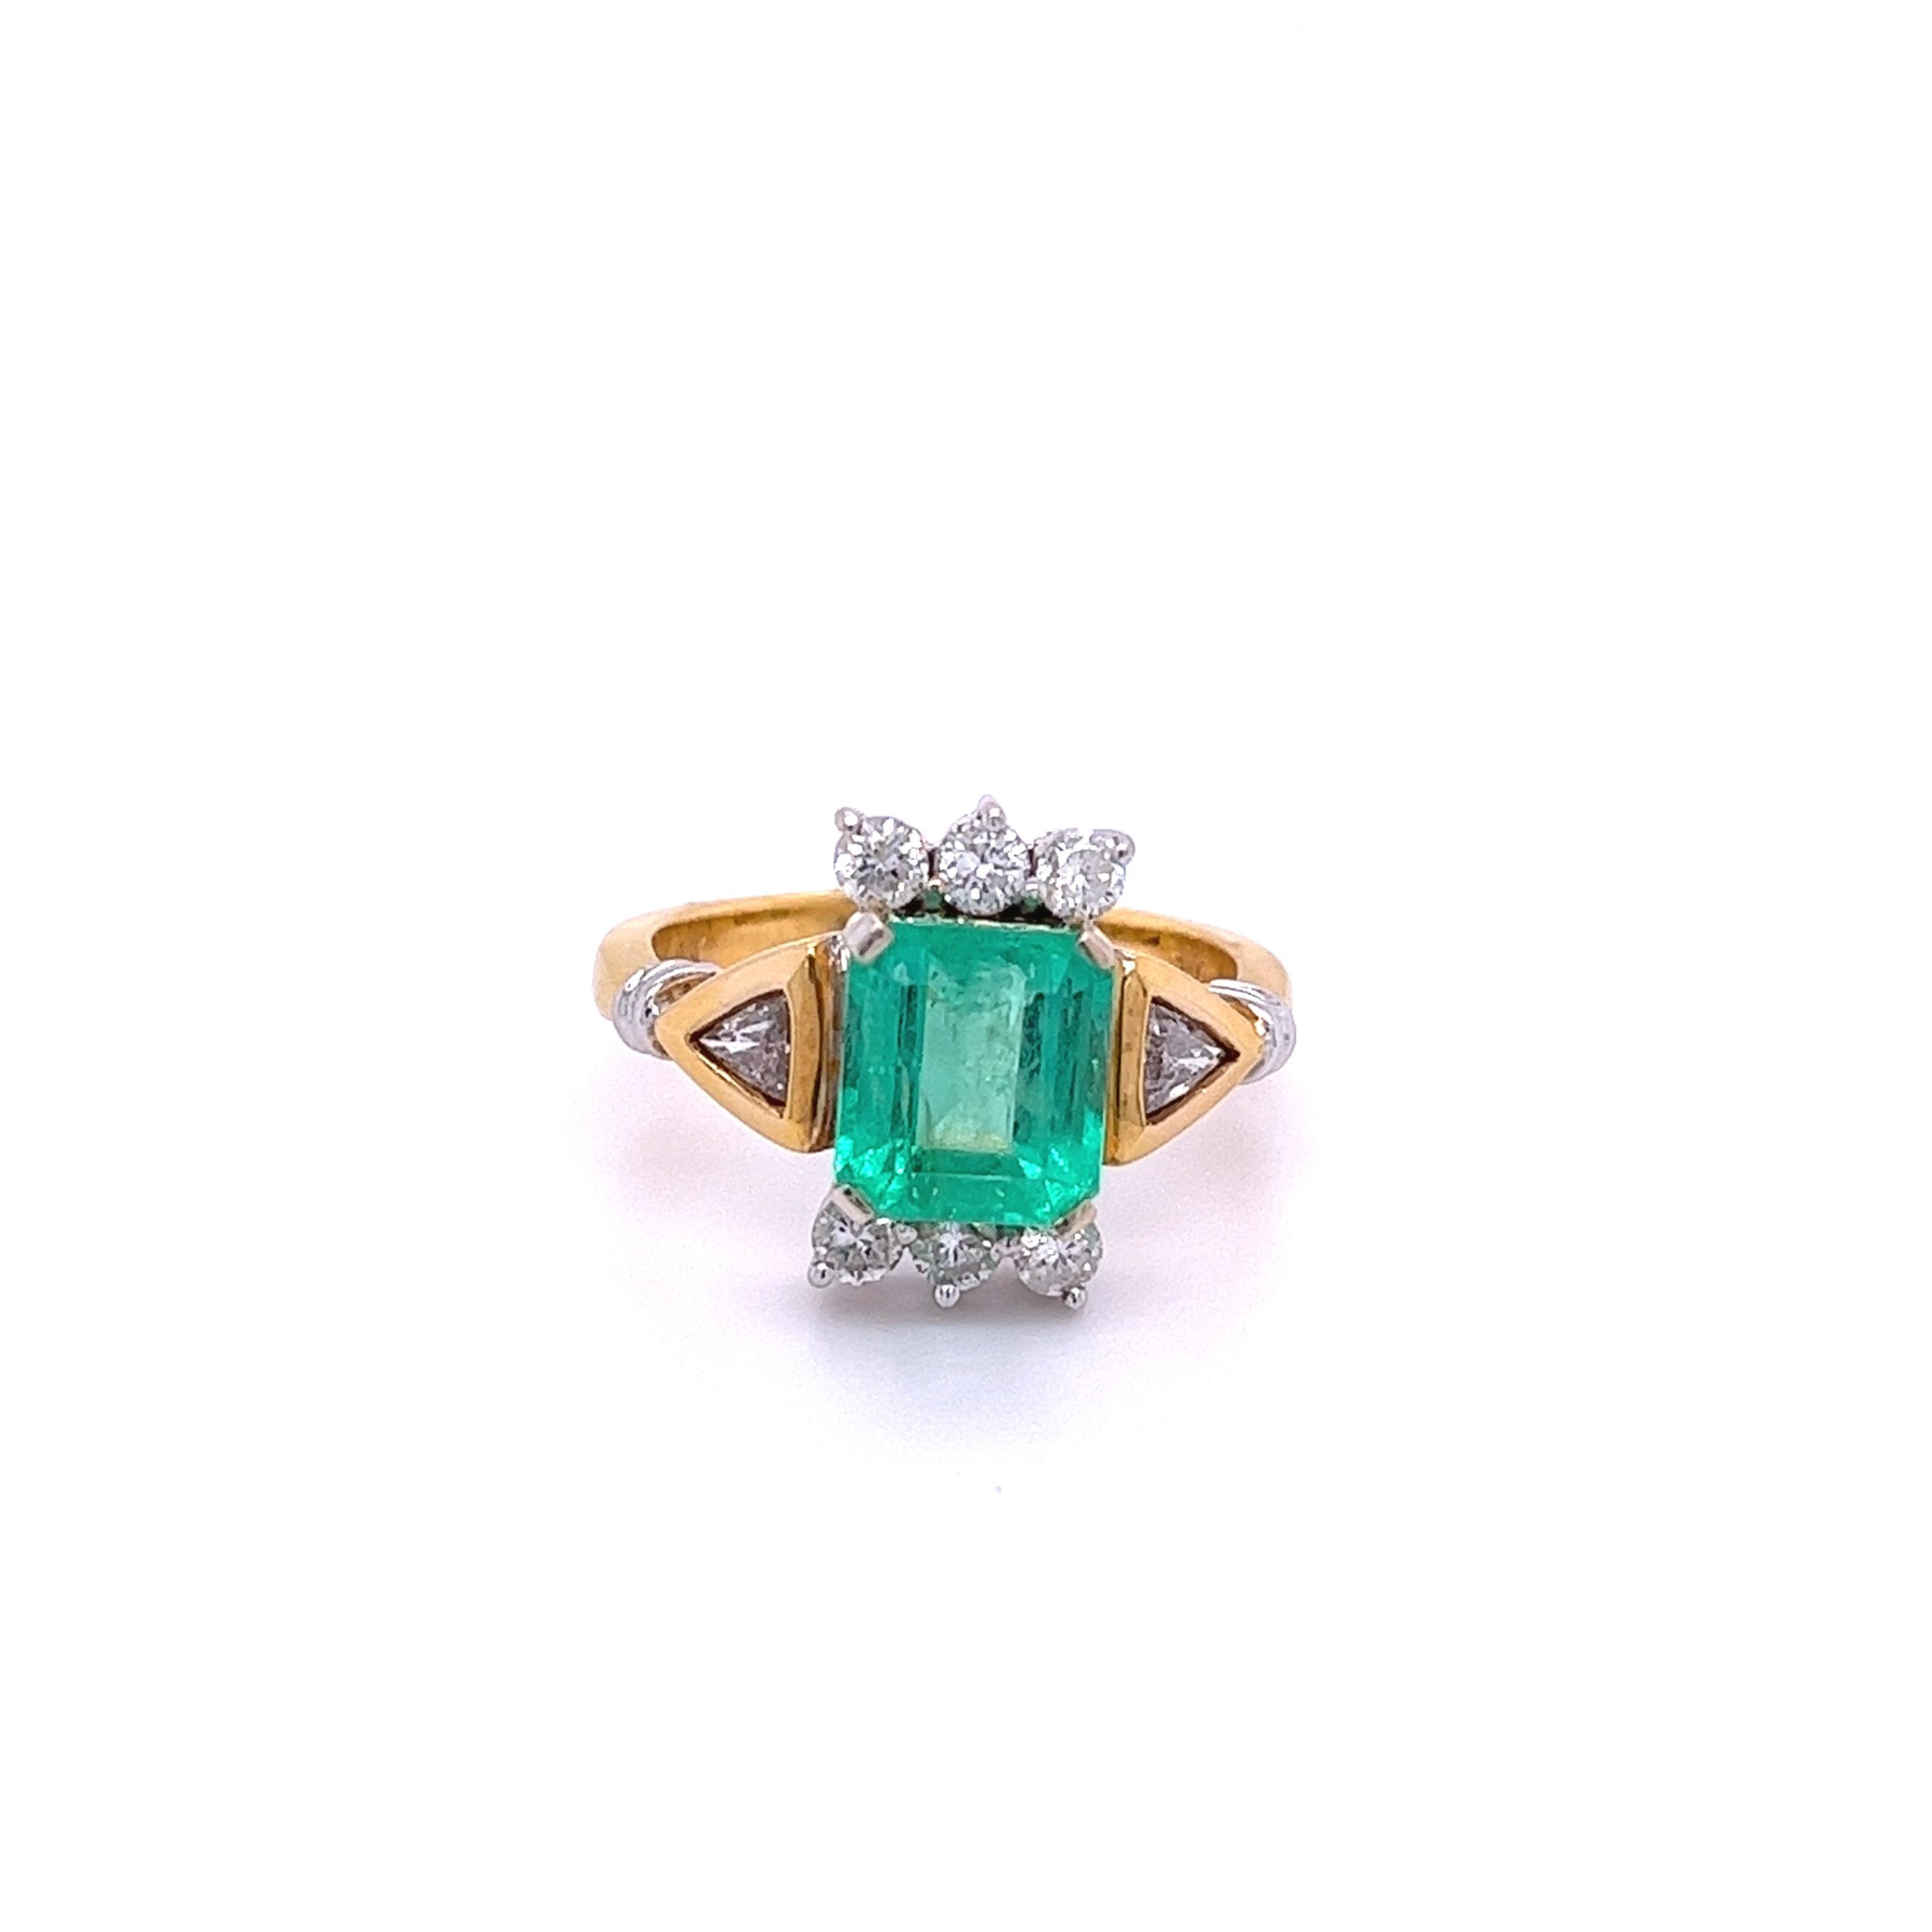 Women's 2.77 Carat Colombian Emerald and Trillion Cut Diamonds in 18k Yellow Gold Ring For Sale